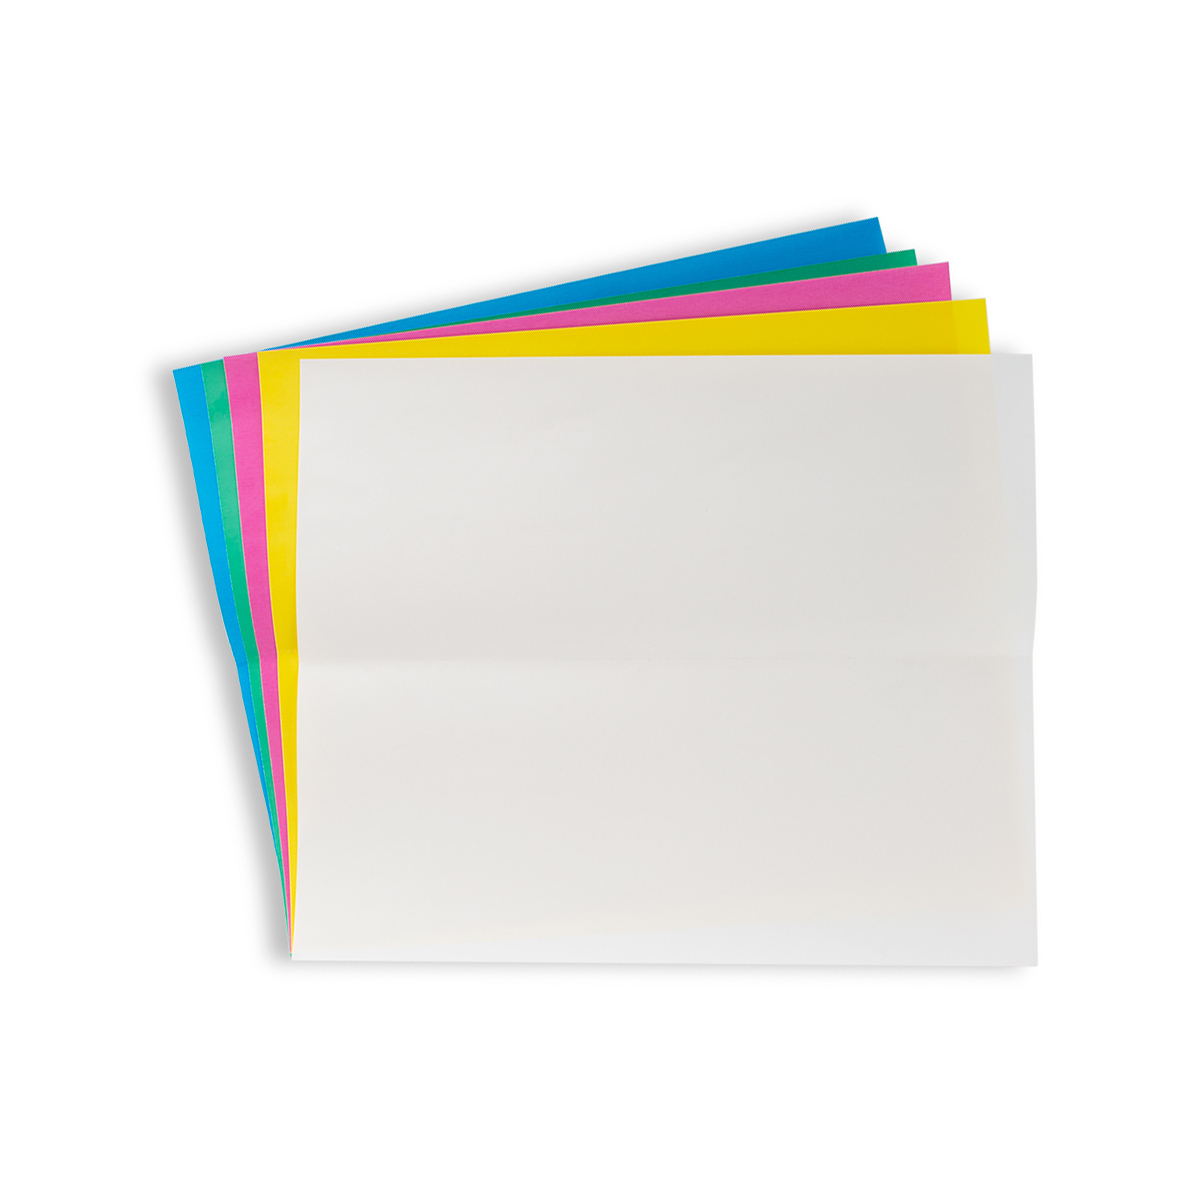 Clover Chacopy Tracing Paper - 12 x 10 - 5/Pack - Assorted Colors